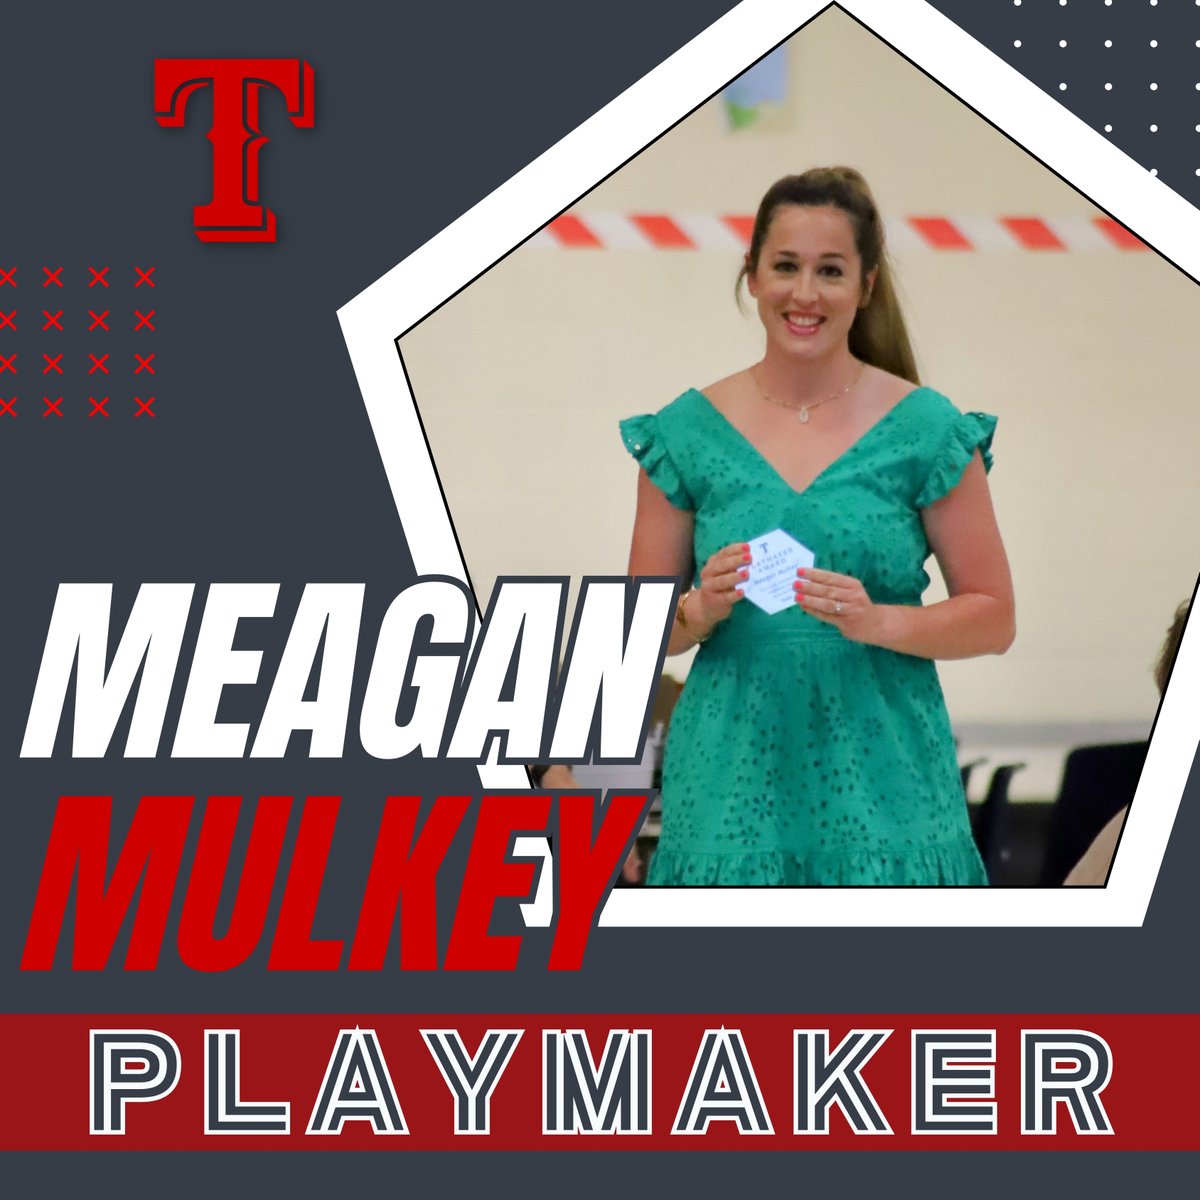 Congratulations to Meagan Mulkey for receiving the TRABC Playmaker Award. Your Loyalty, Dedication and Commitment shines above the rest! Thank you for elevating our Girls Basketball Program & especially for facilitating the Inaugural Empowering Women Through Athletics Symposium.